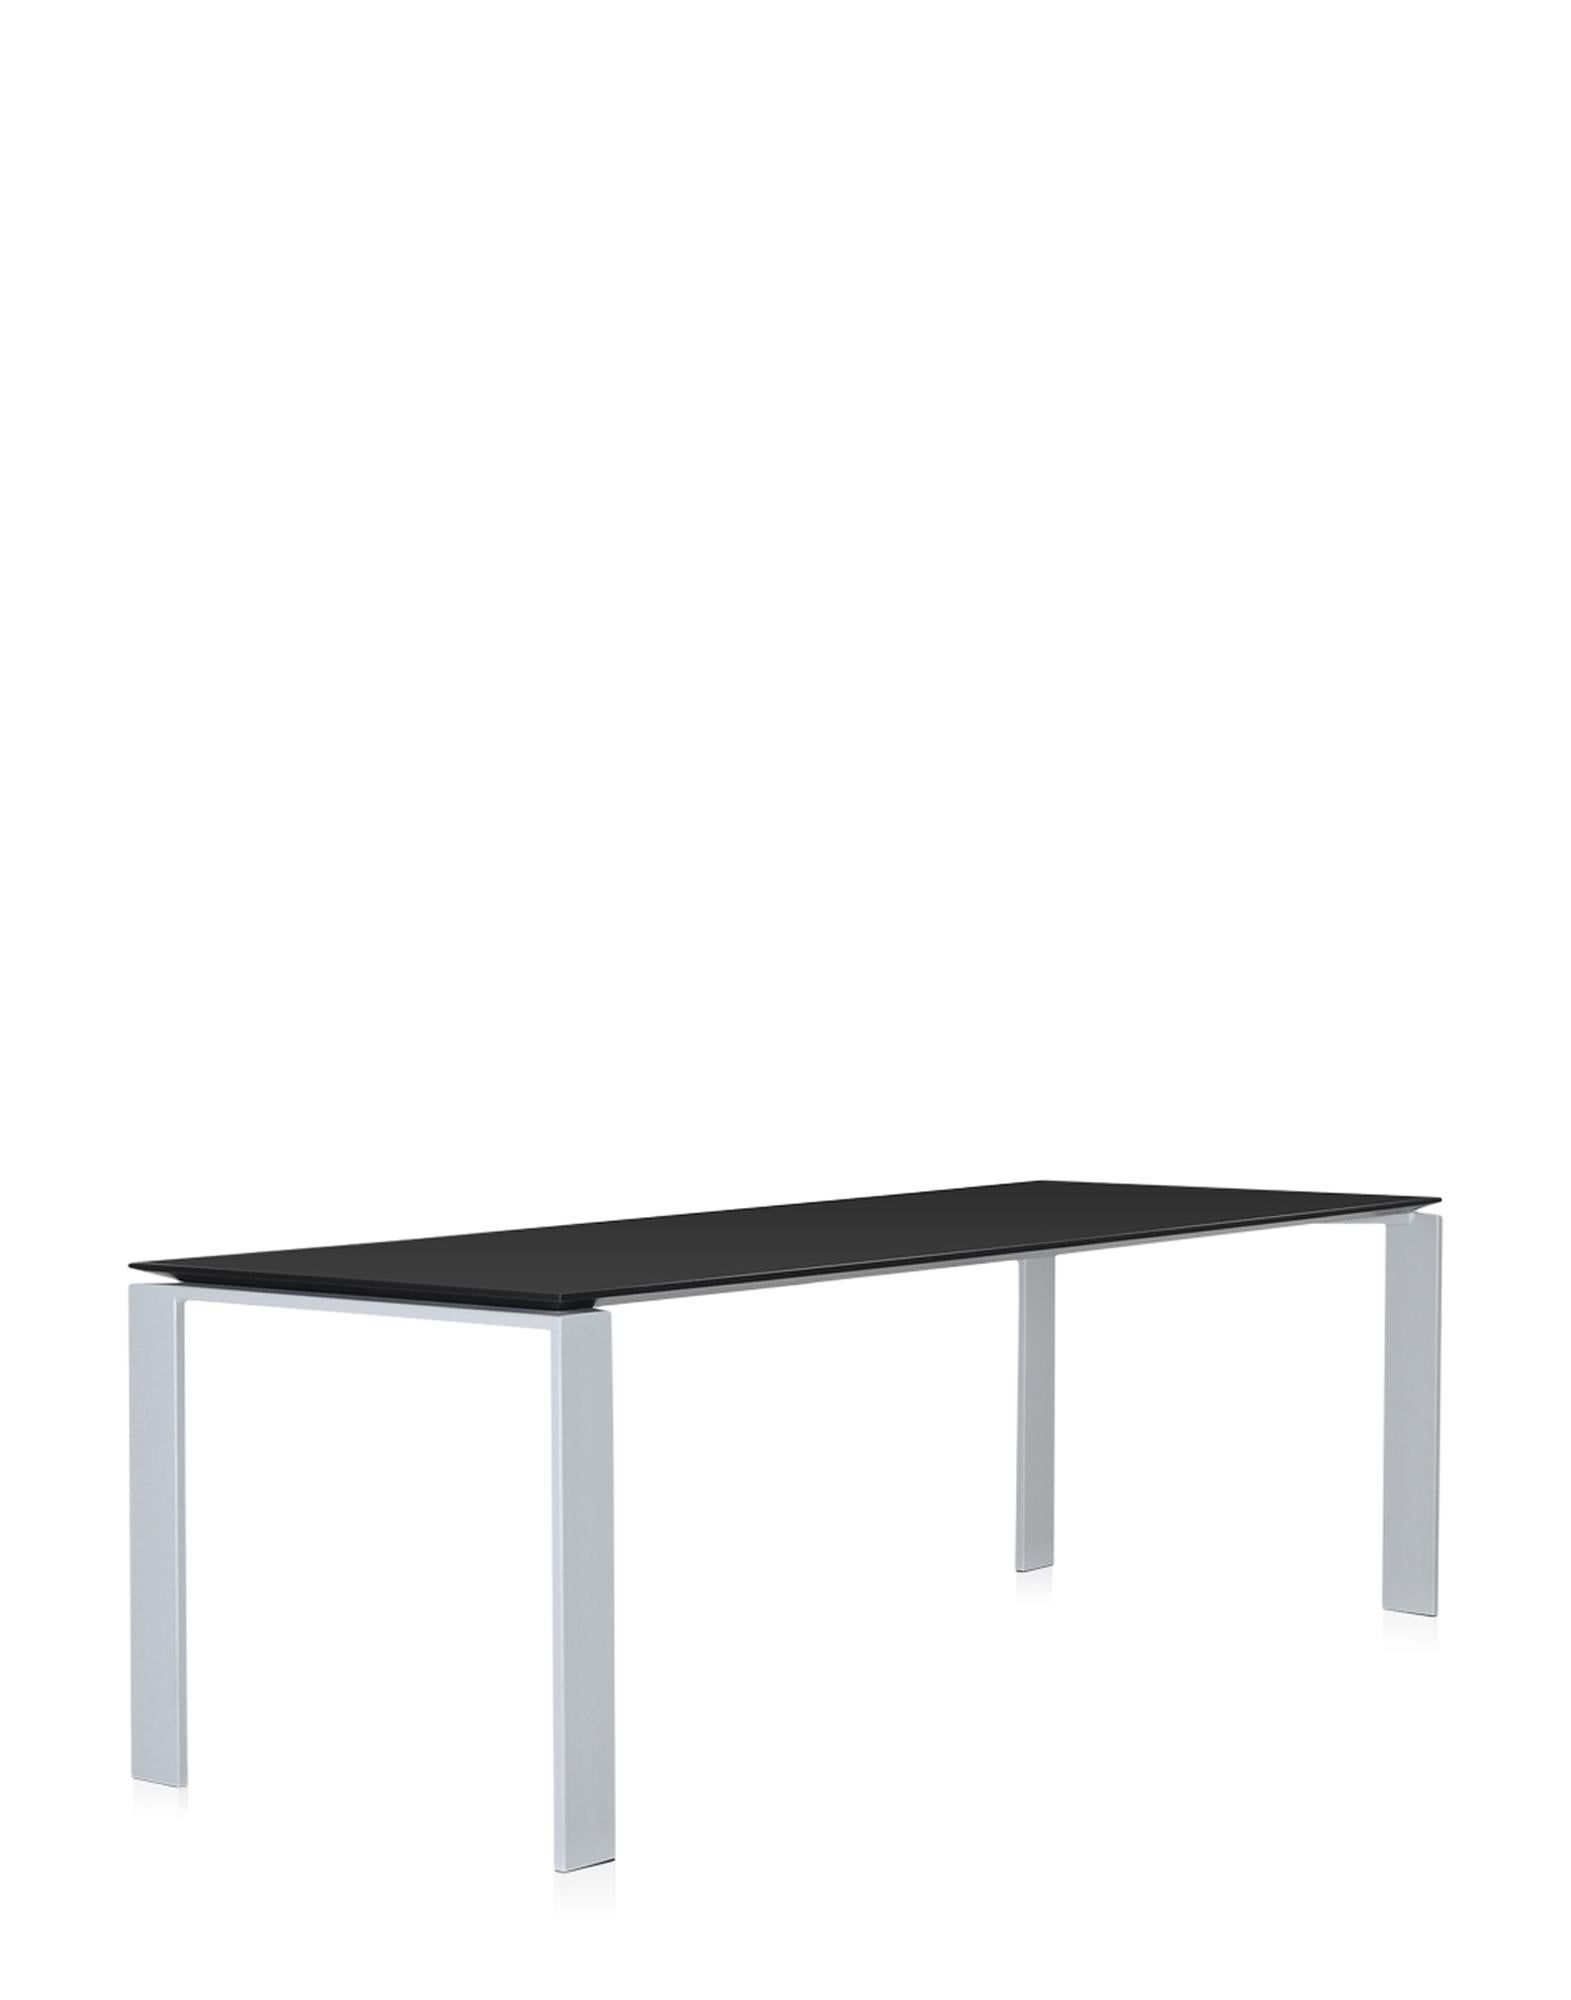 This functional and refined table also has a strict geometric design. Thanks to the elegant design solution, the position of the slim table top allows for the convenient positioning of drawers or storage furnishings for computer hardware. They can